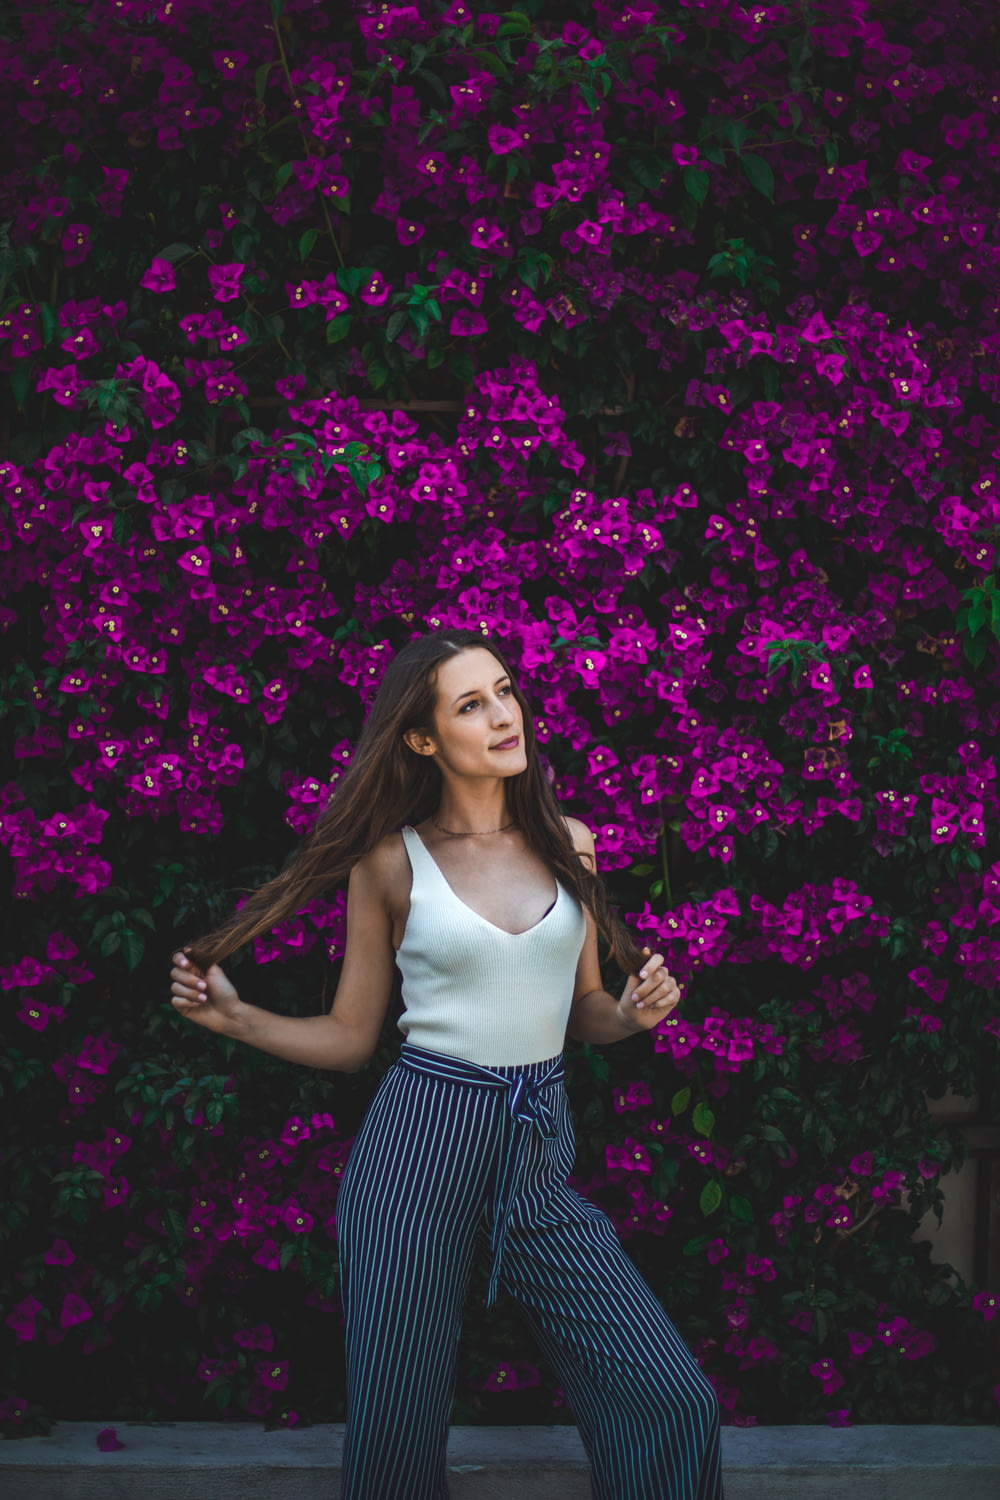 smiling woman holding her hair in front of purple flowers during daytime